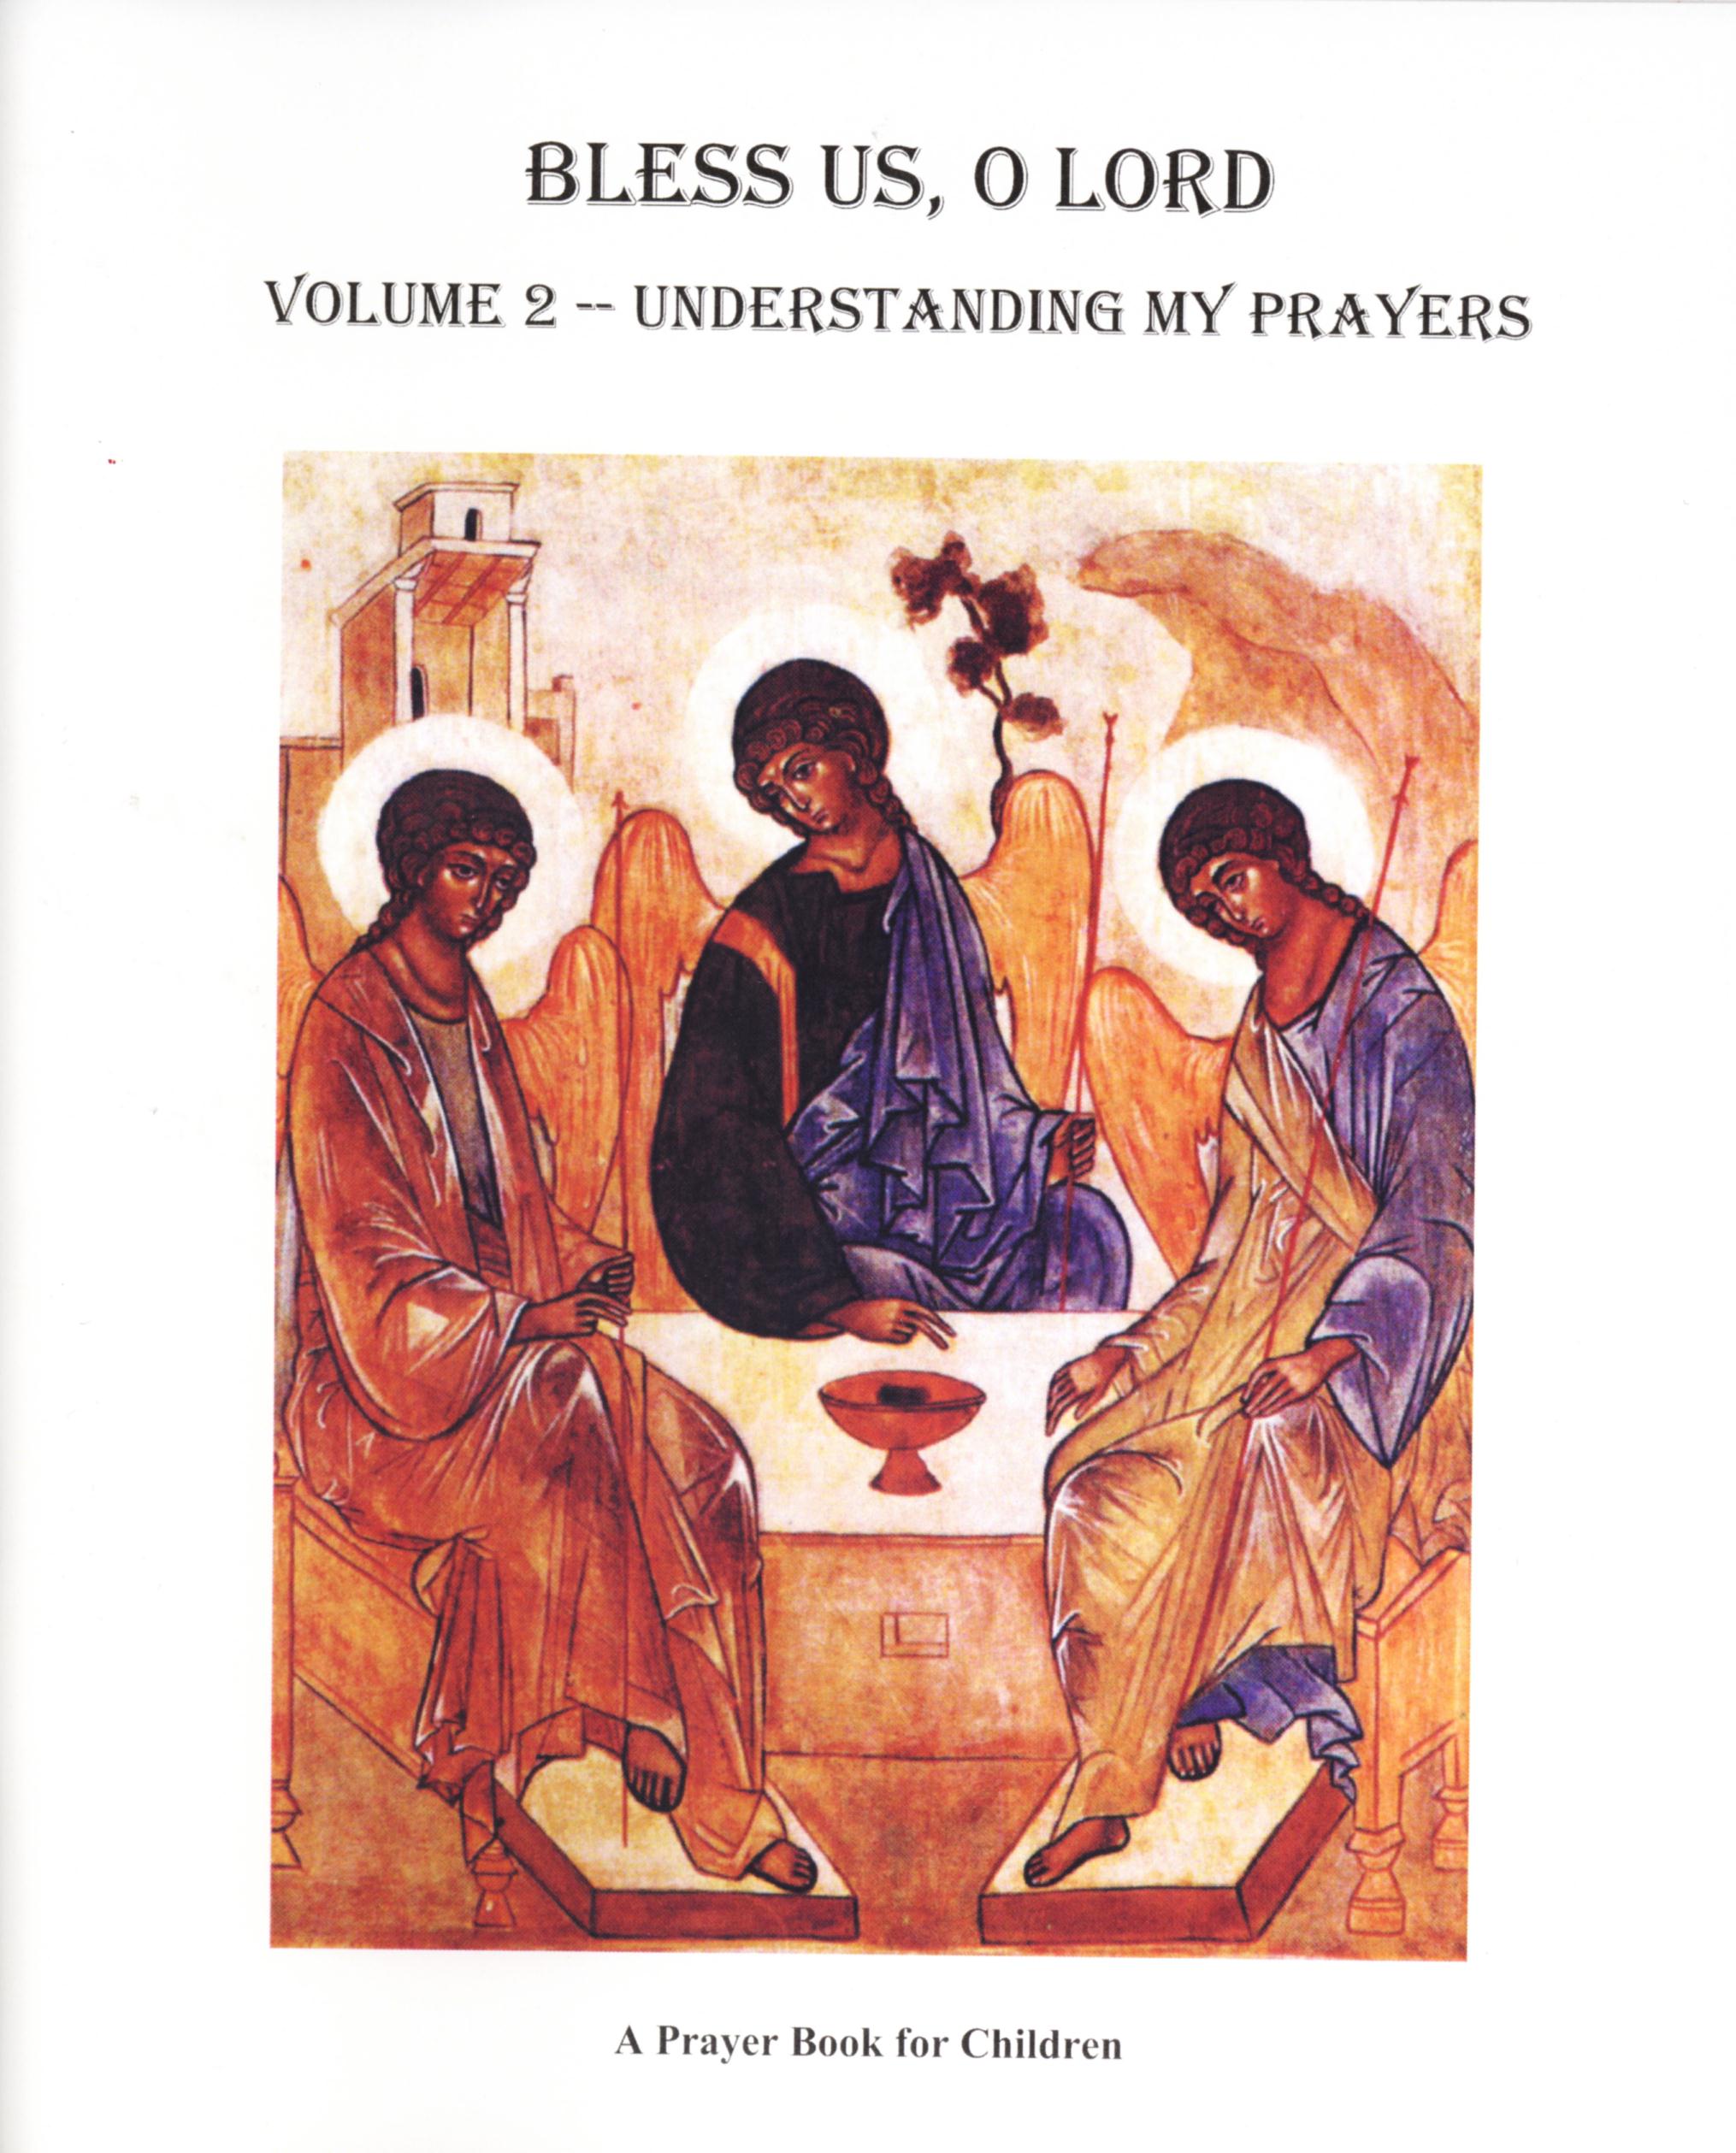 bless-us-o-lord-volume-2-understanding-my-prayers-CHL52-A52